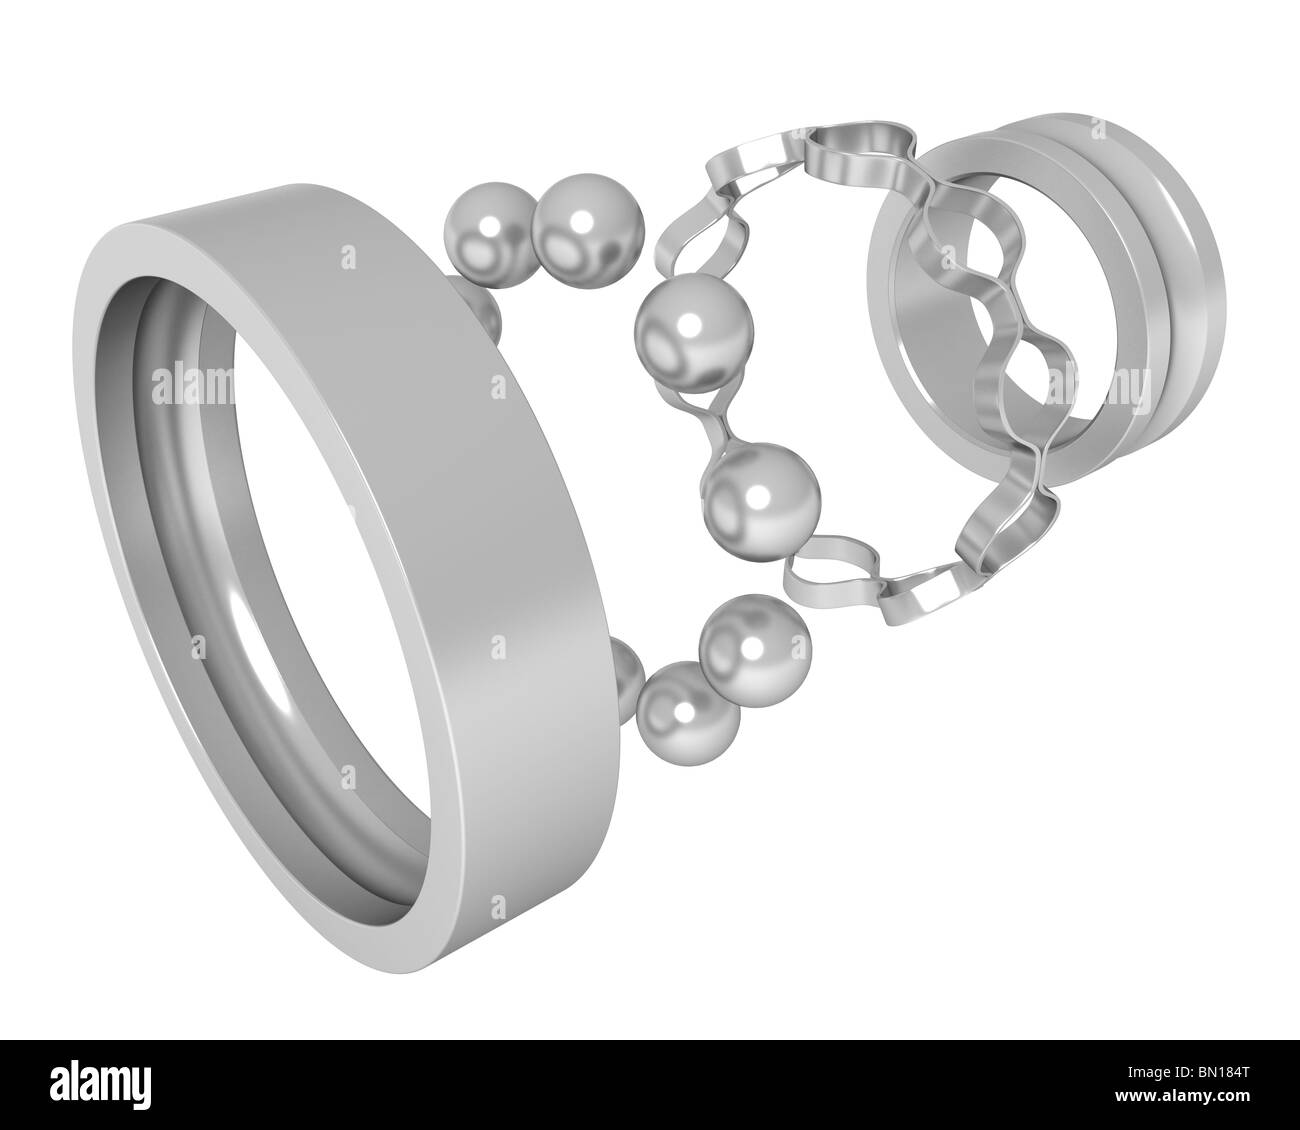 Three-dimensional model - the bearing taken to pieces. Stock Photo